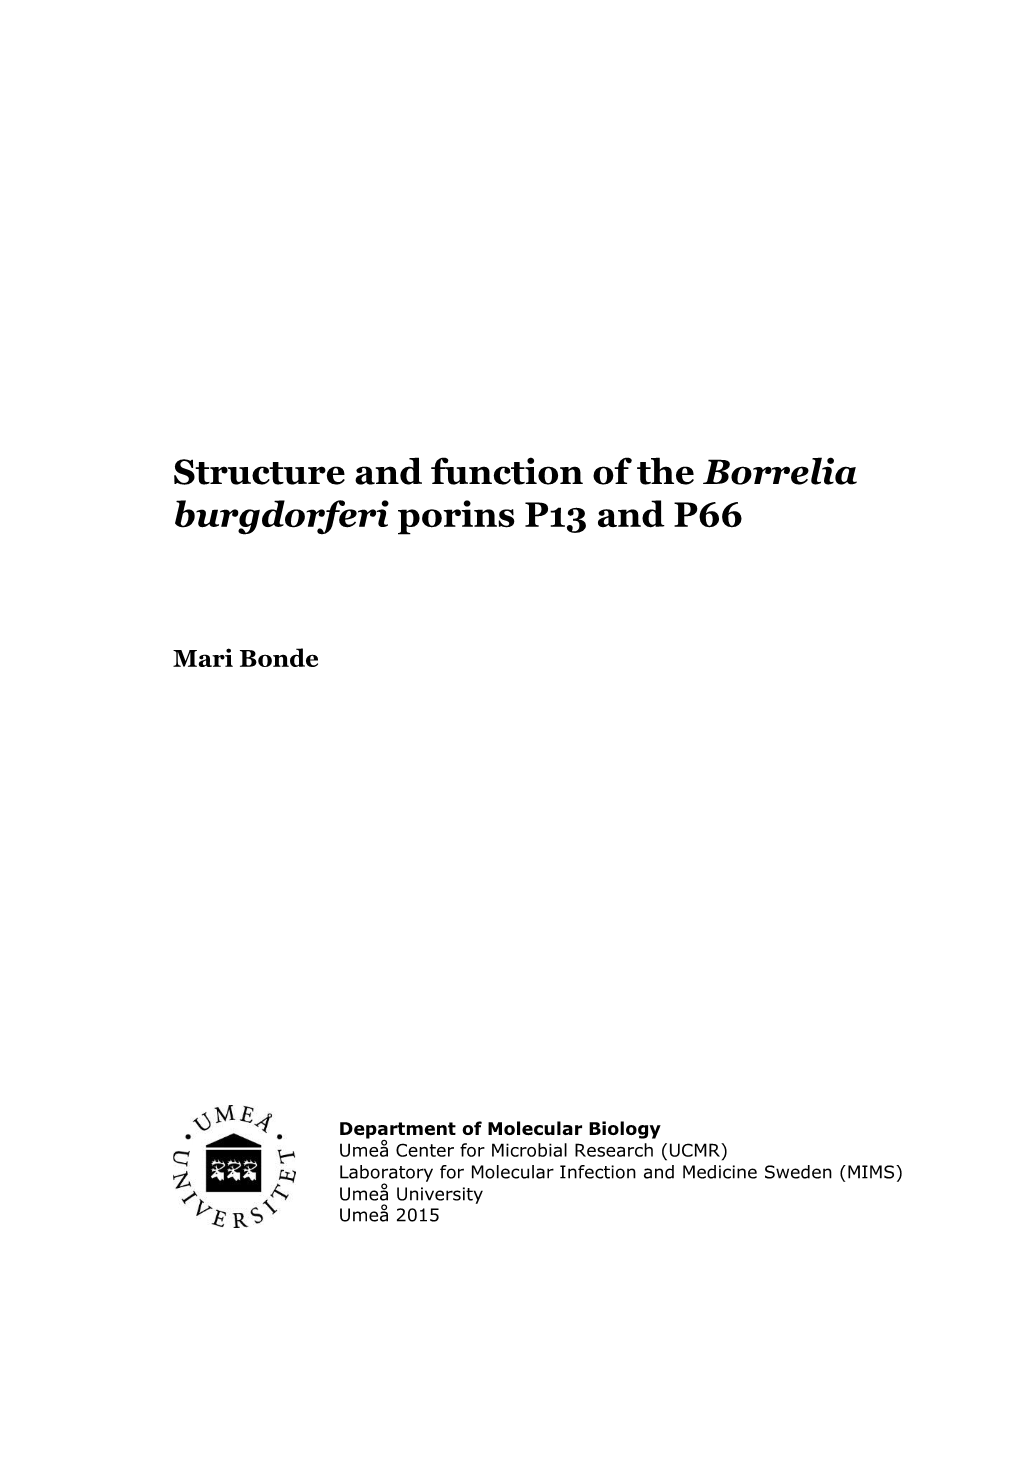 Structure and Function of the Borrelia Burgdorferi Porins P13 and P66